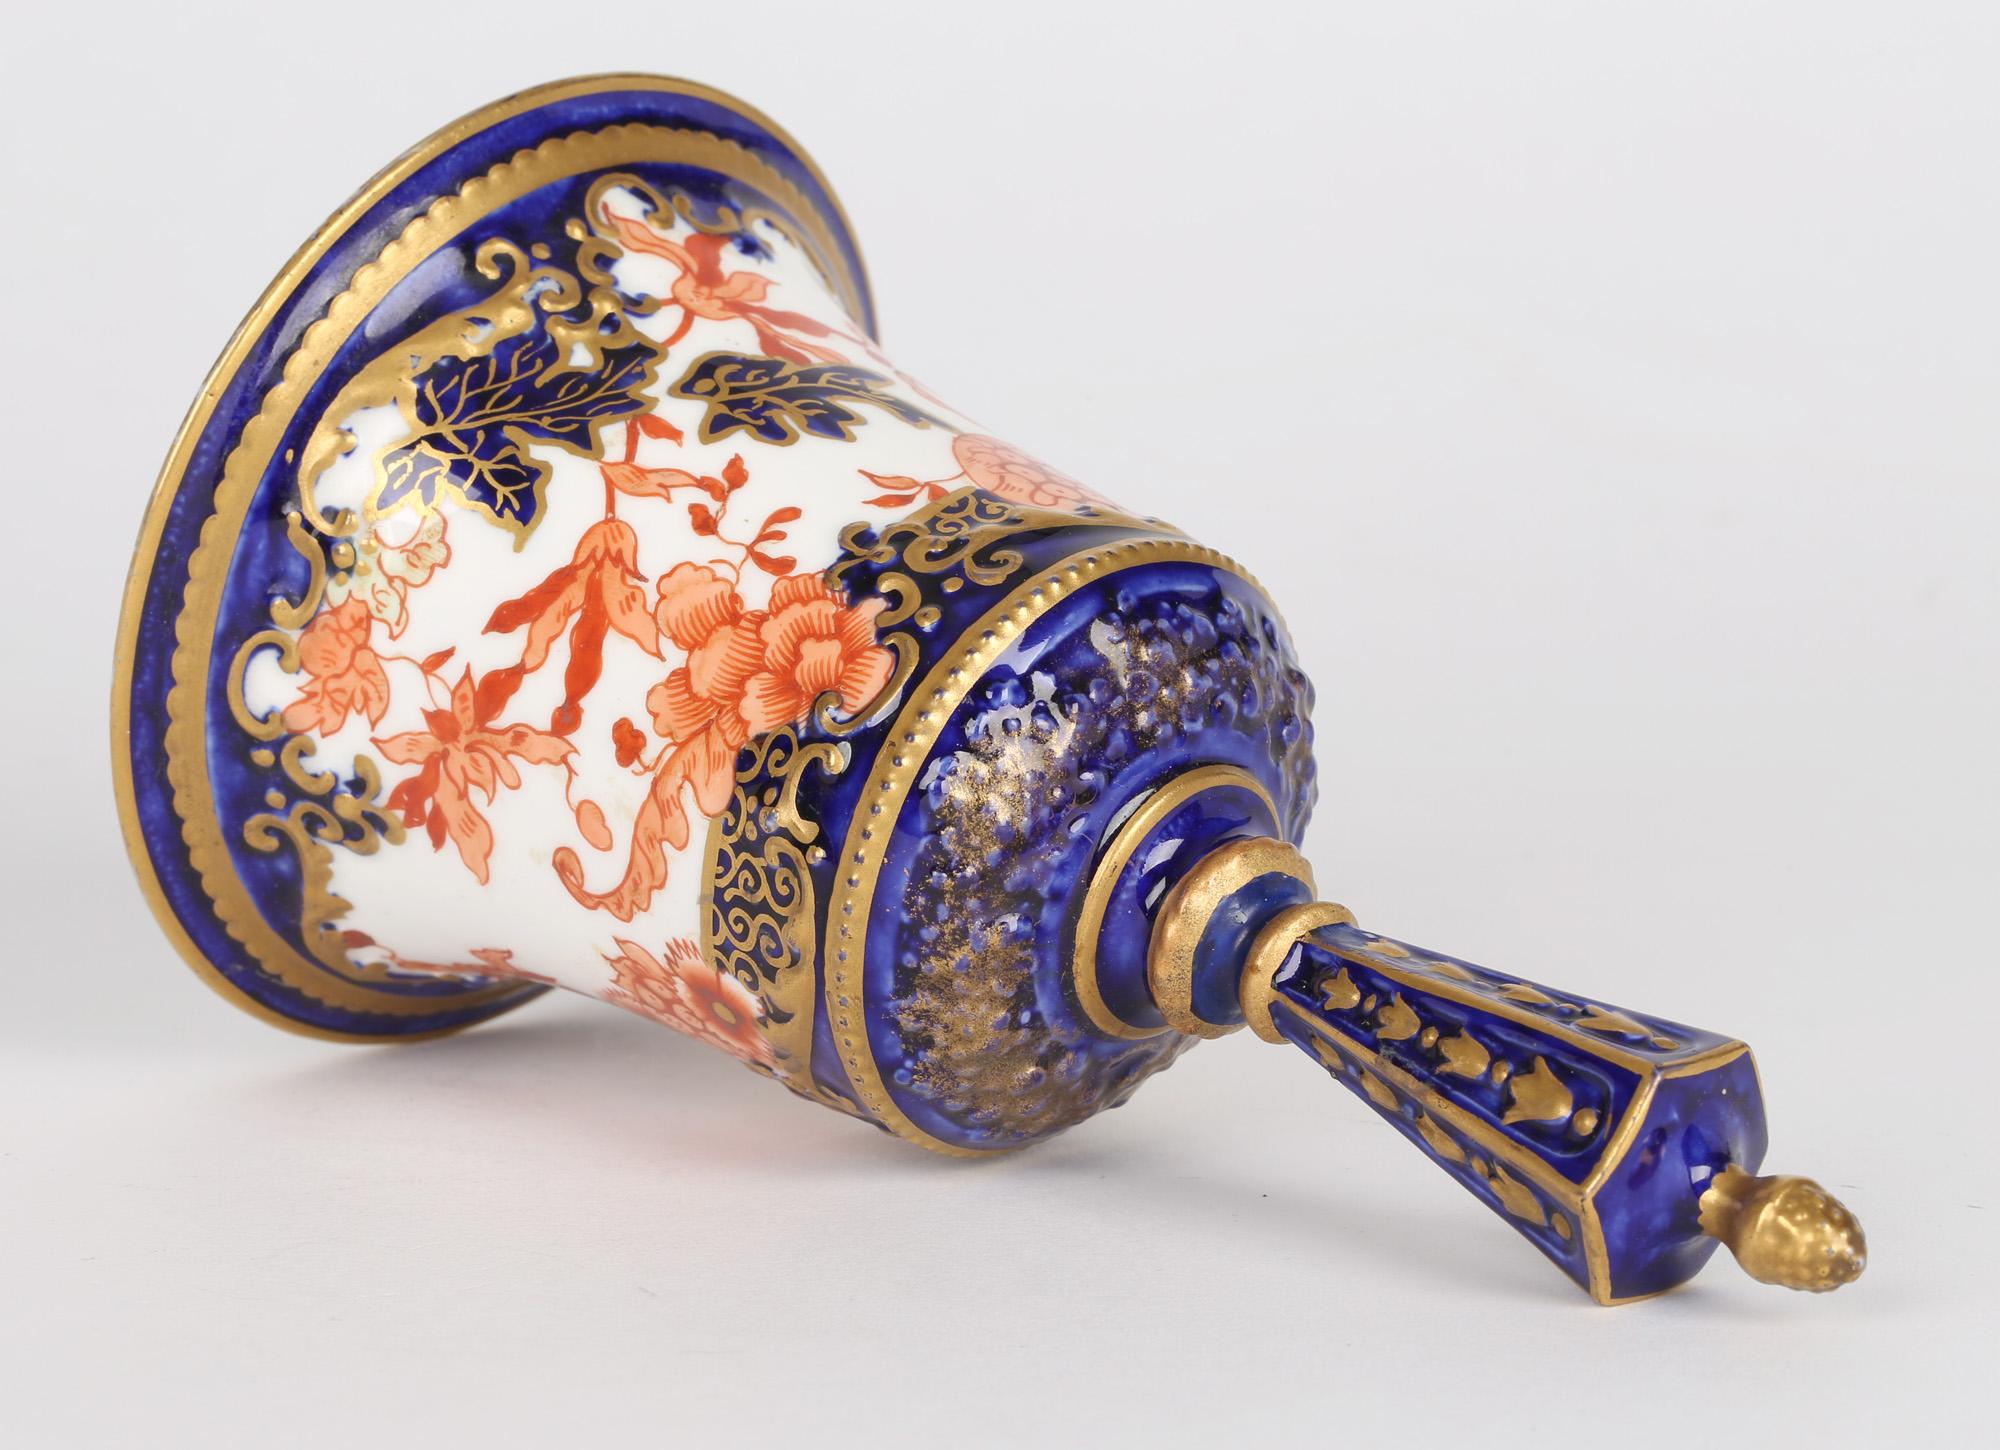 A very rare antique porcelain imari pattern bell by Royal Crown Derby and dating from 1904. The bell has a traditional bell shaped body with molded and finely decorated patterning in tones of red, blue and green highlighted with gilding. The bell